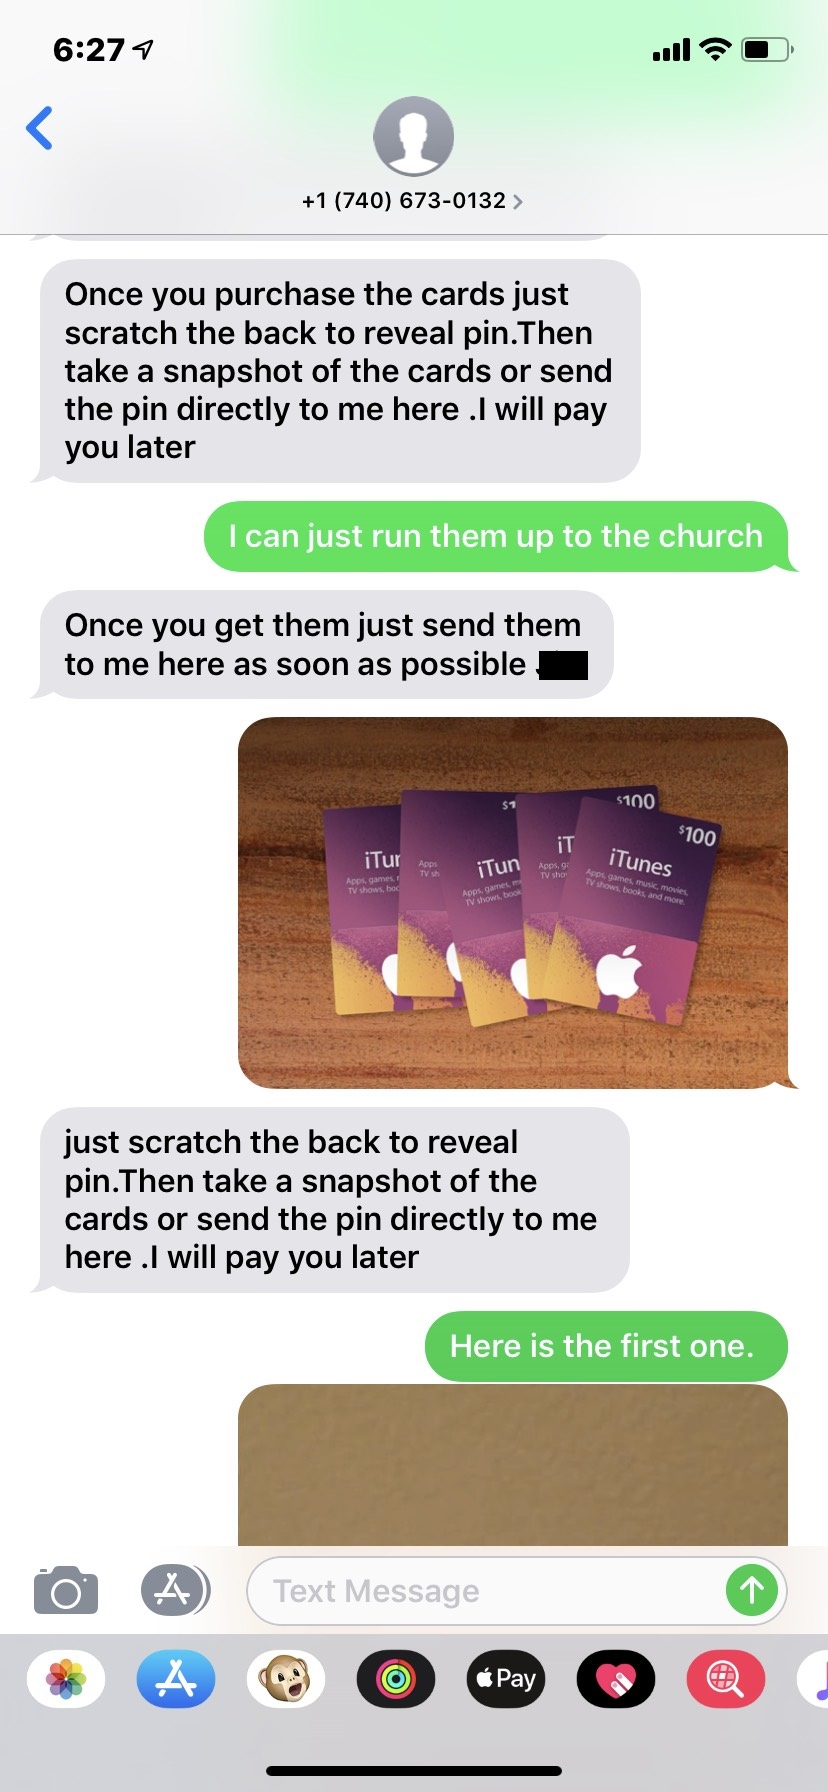 material - 1 740 6730132 > Once you purchase the cards just scratch the back to reveal pin.Then take a snapshot of the cards or send the pin directly to me here I will pay you later I can just run them up to the church Once you get them just send them to 